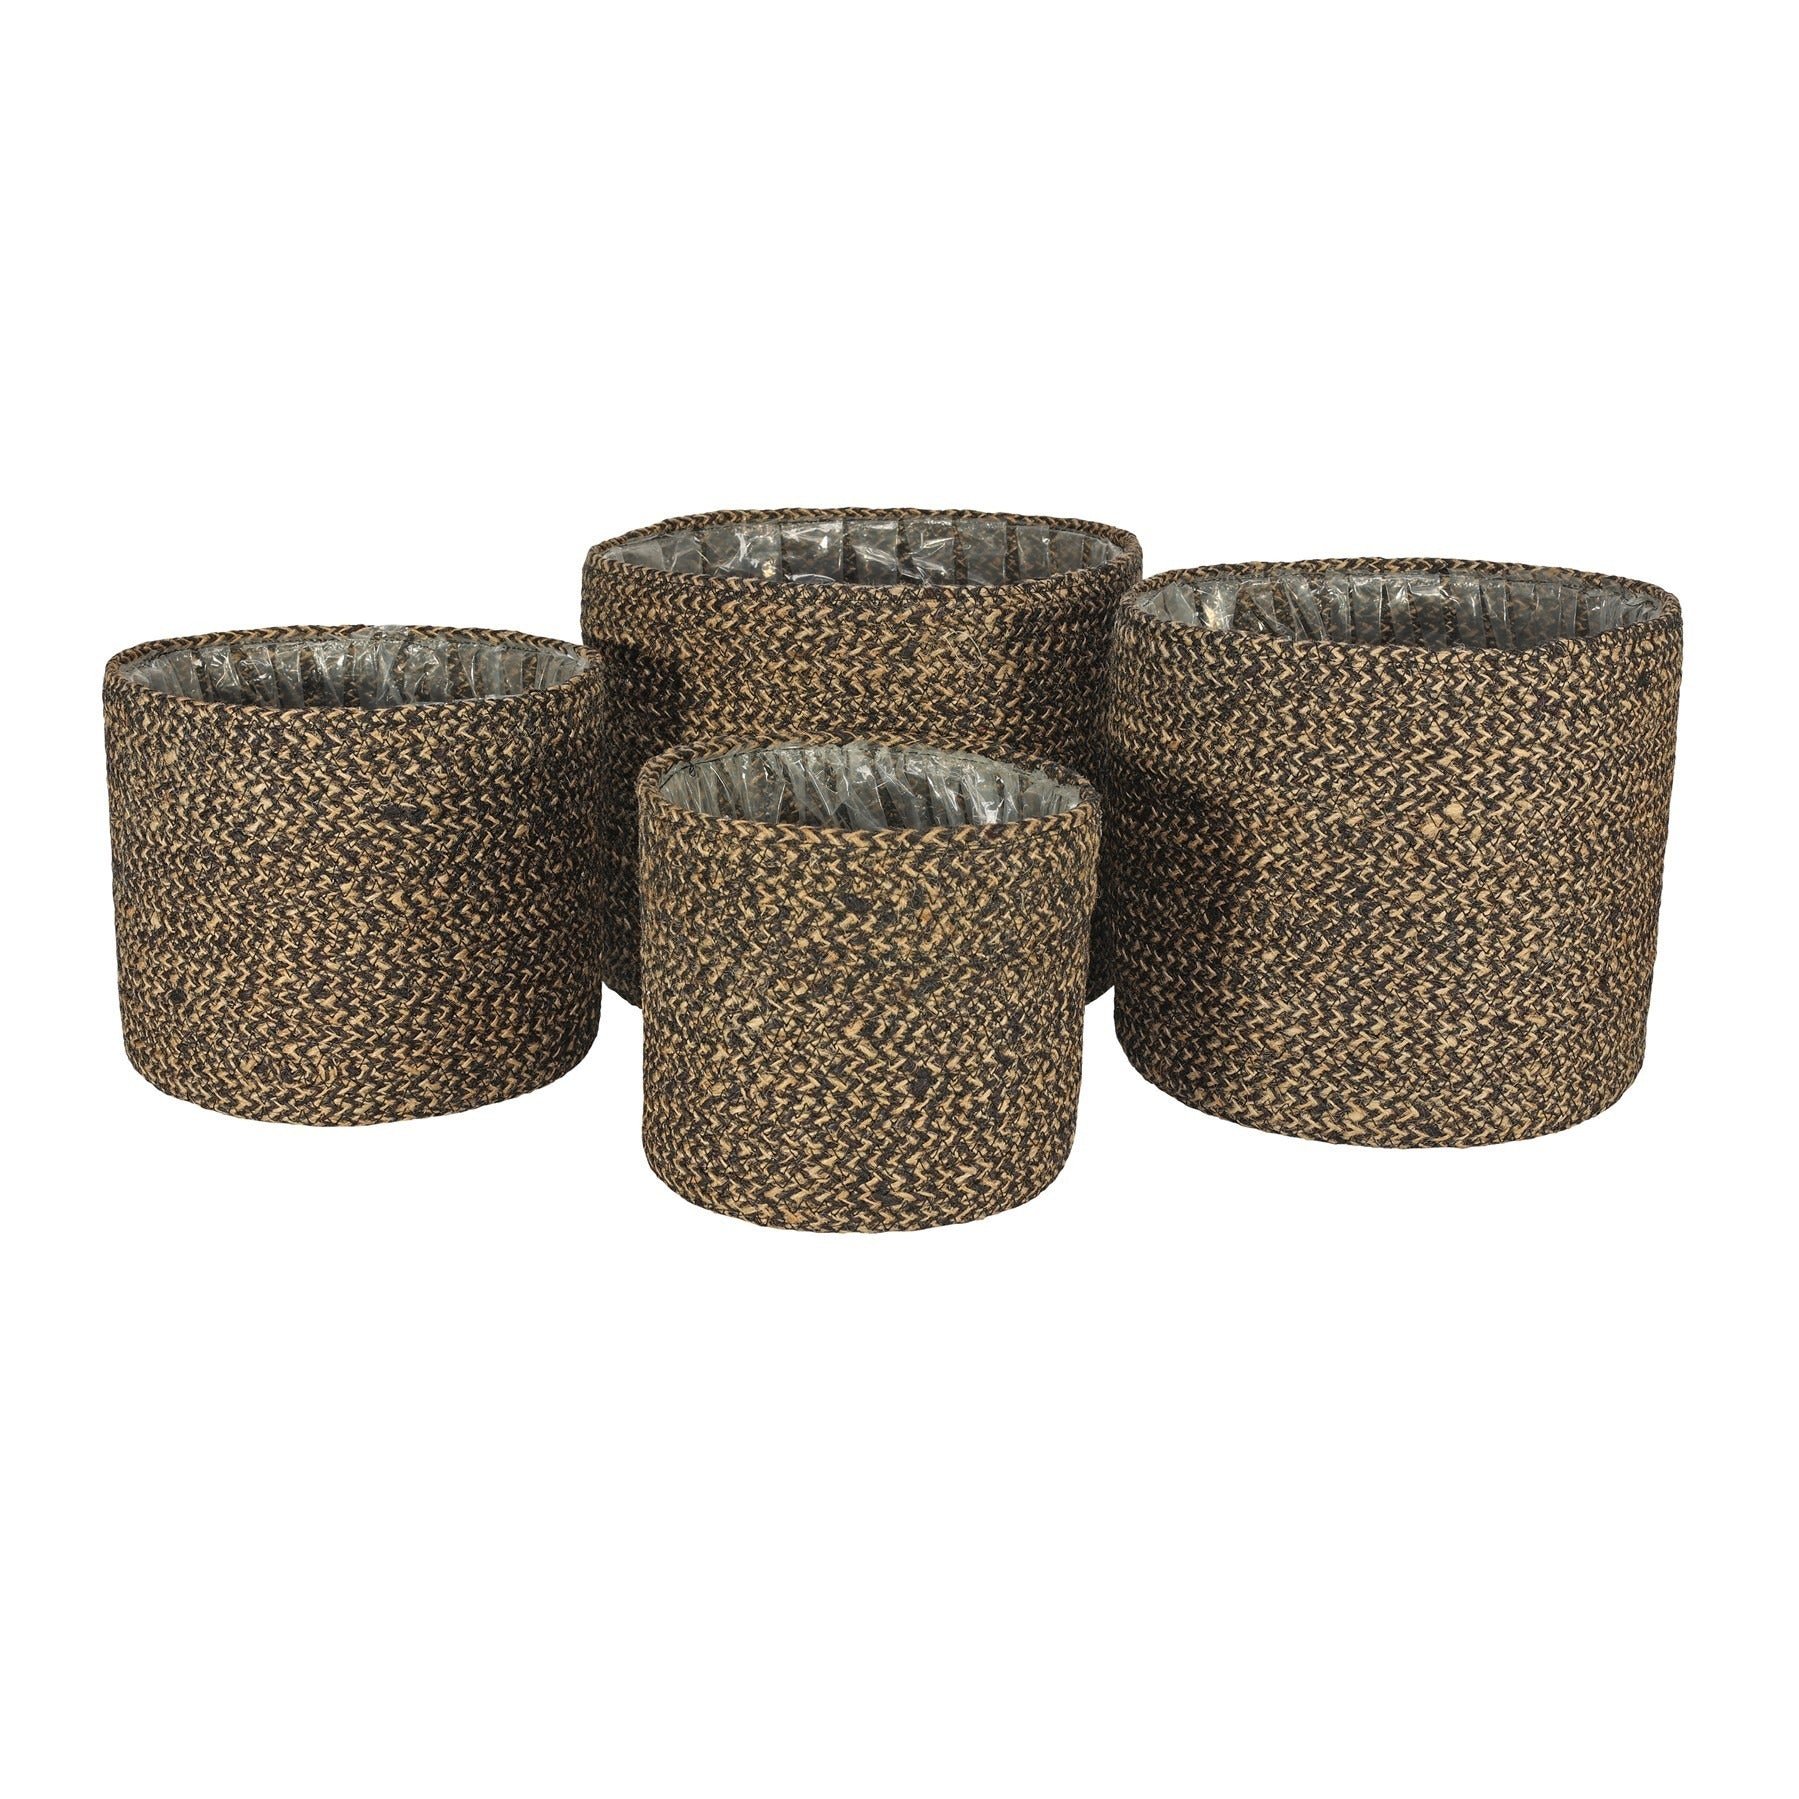 View Set of 4 Jute Braided Rope Basket with Liner information